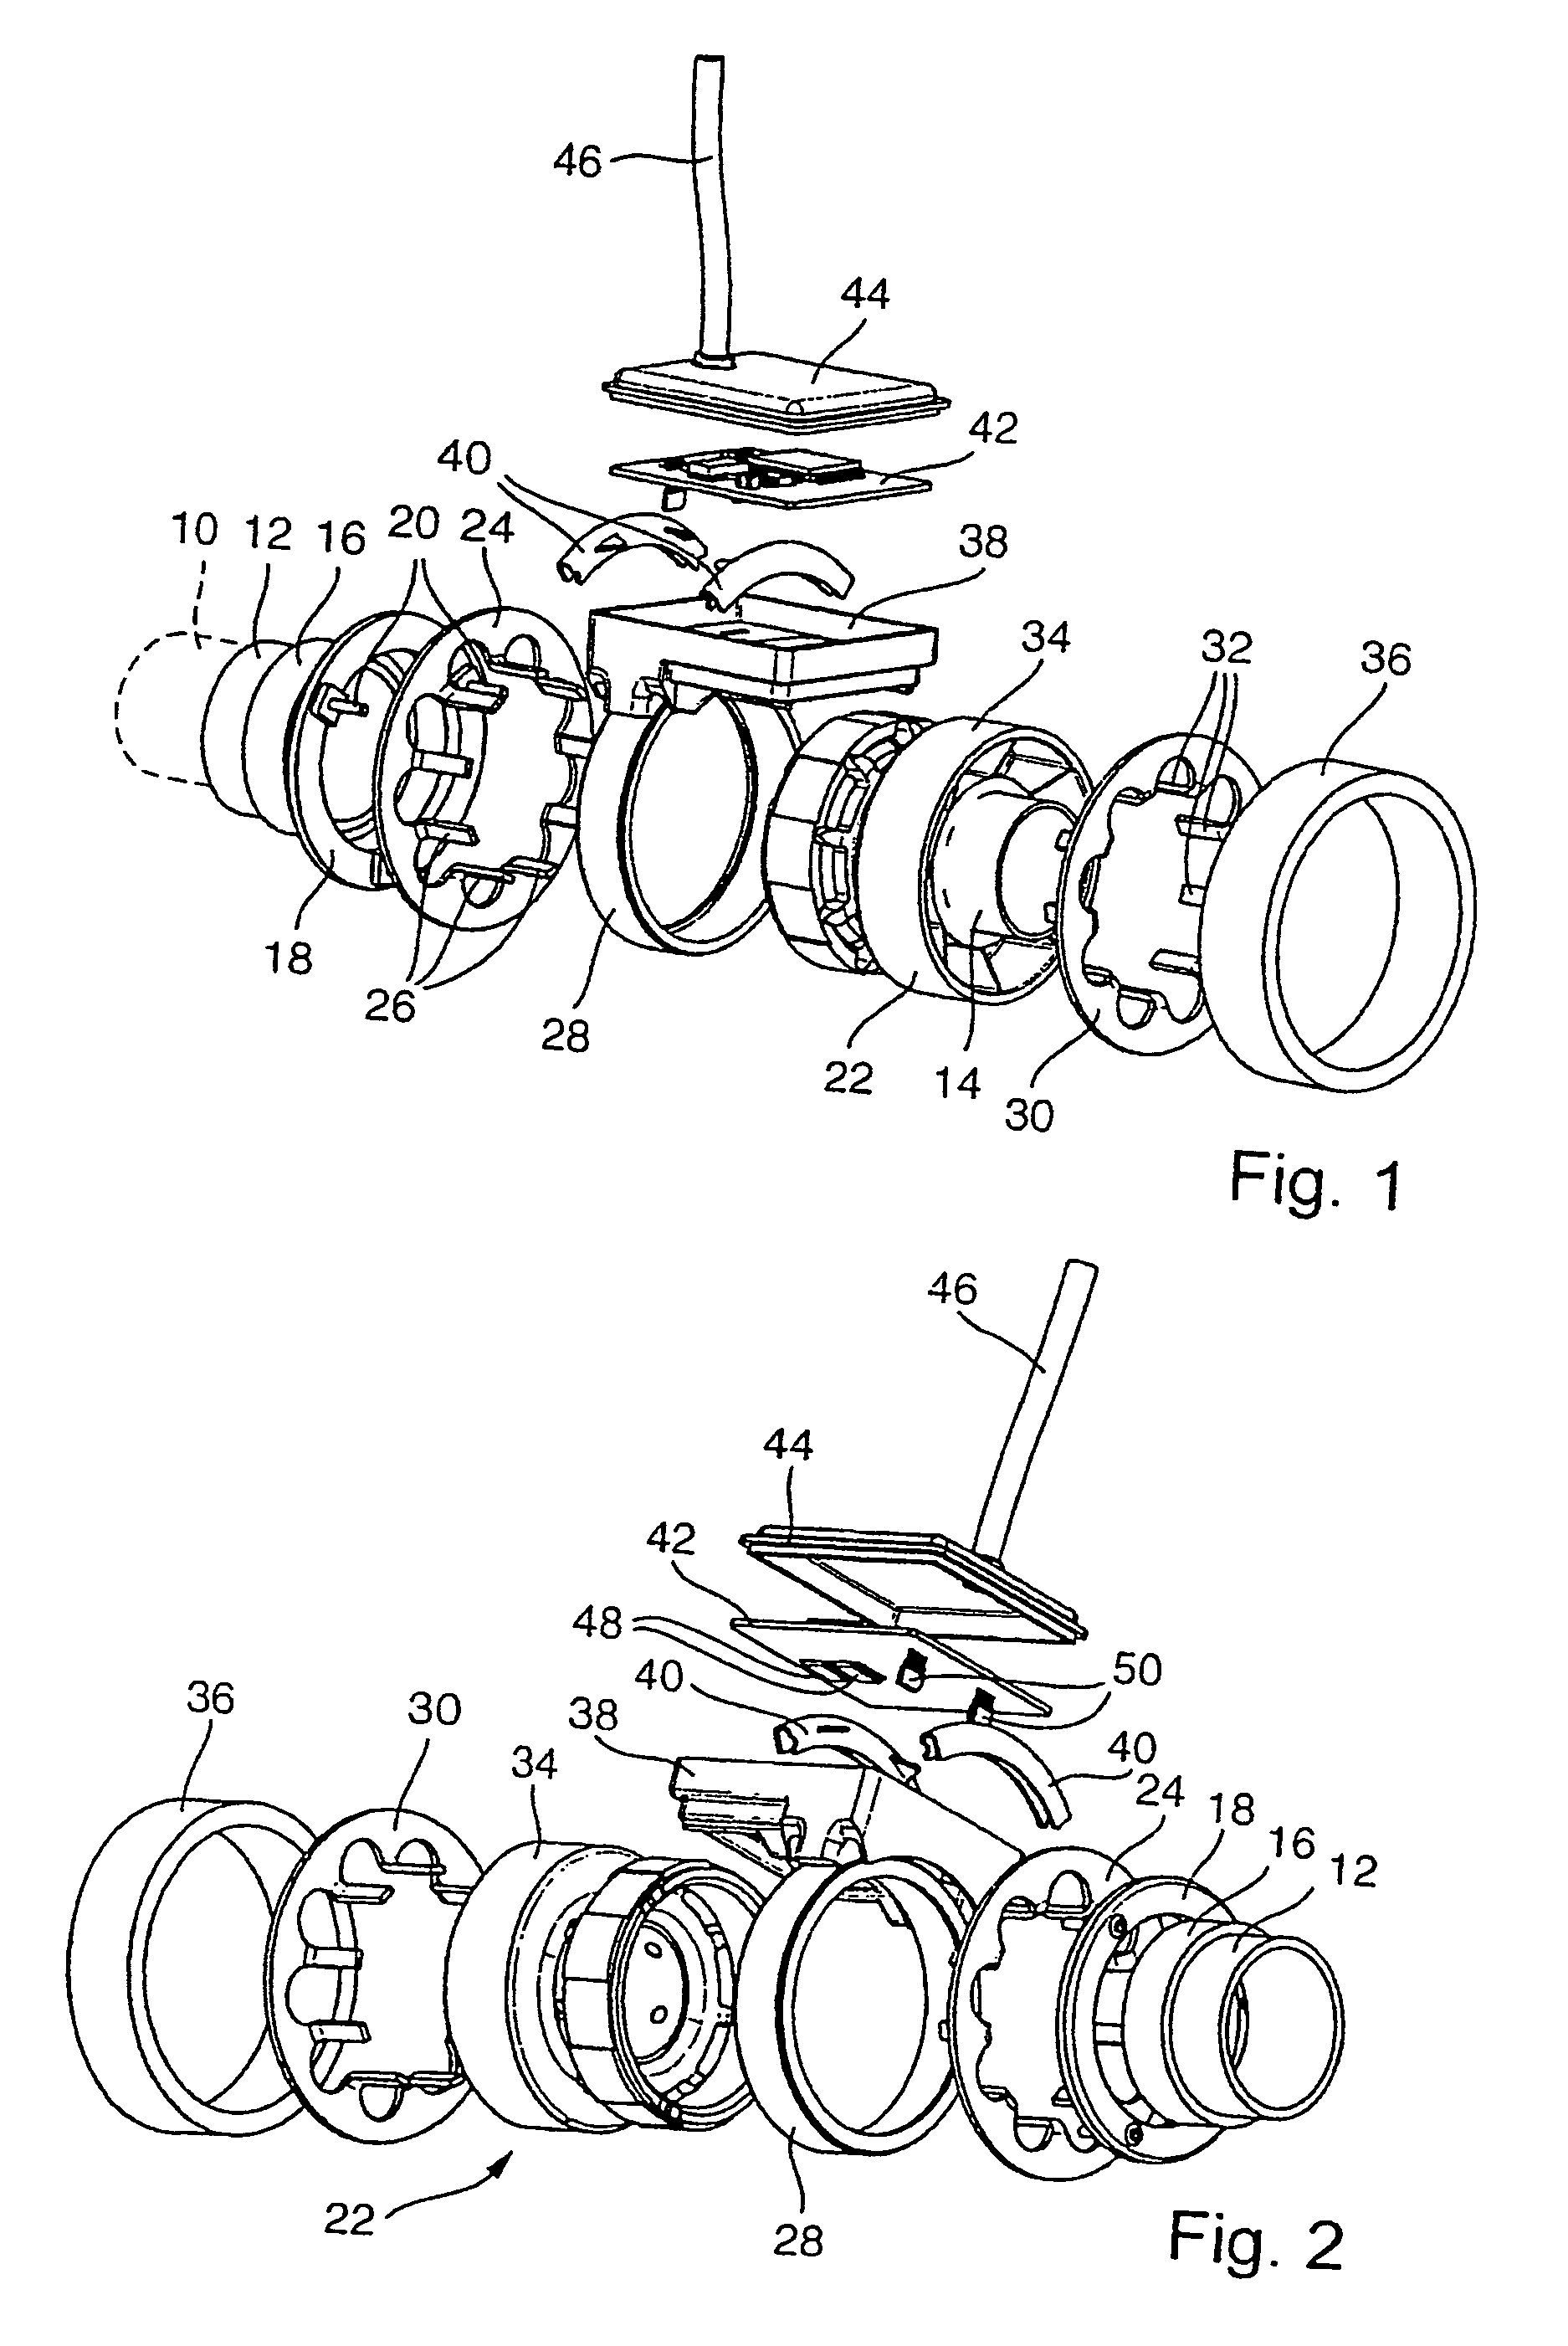 Device for determining a steering angle and a torque that is exerted on a steering shaft